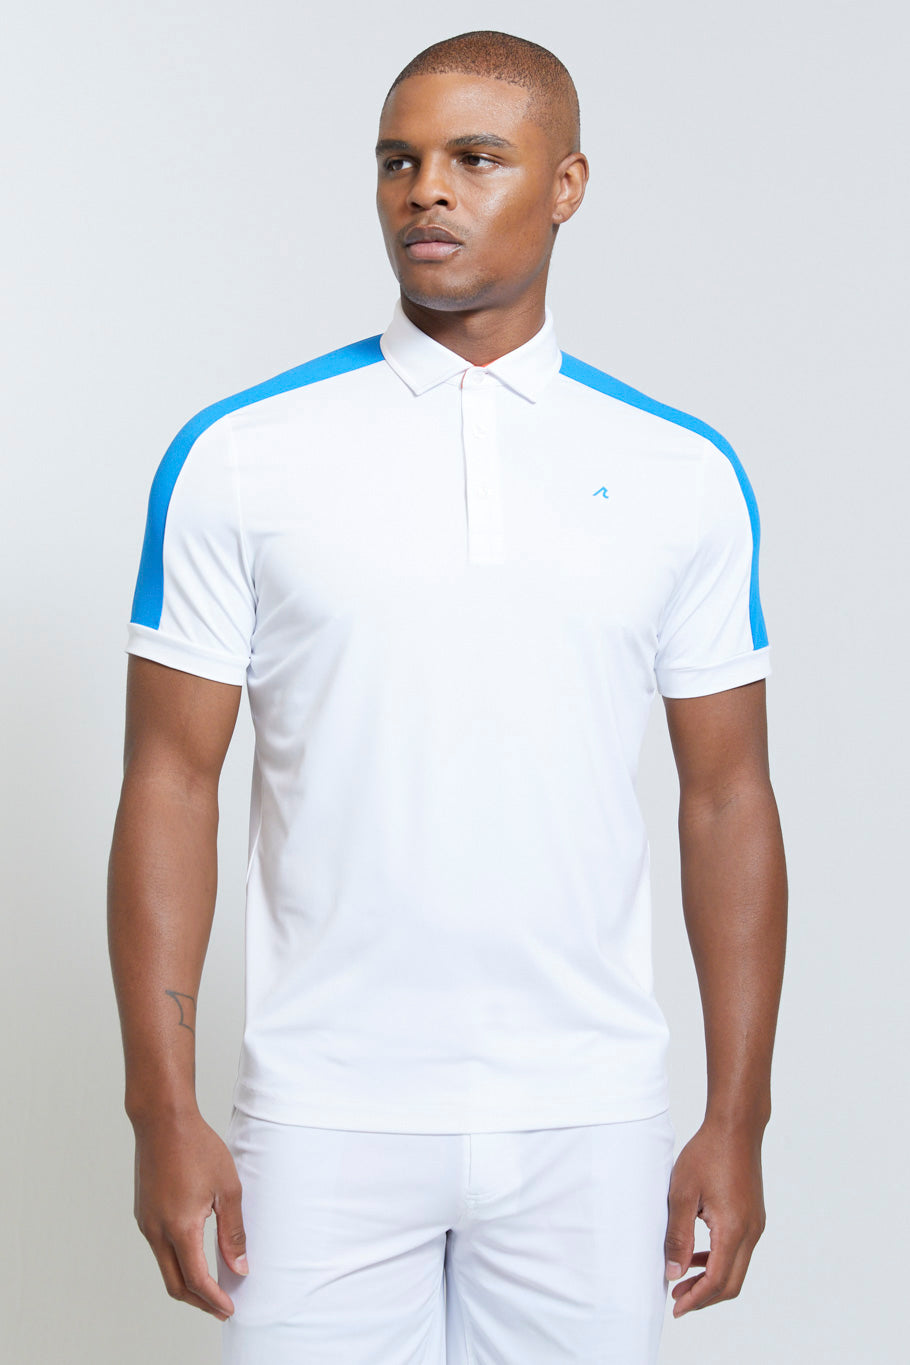 TEvans Polo in Bright White